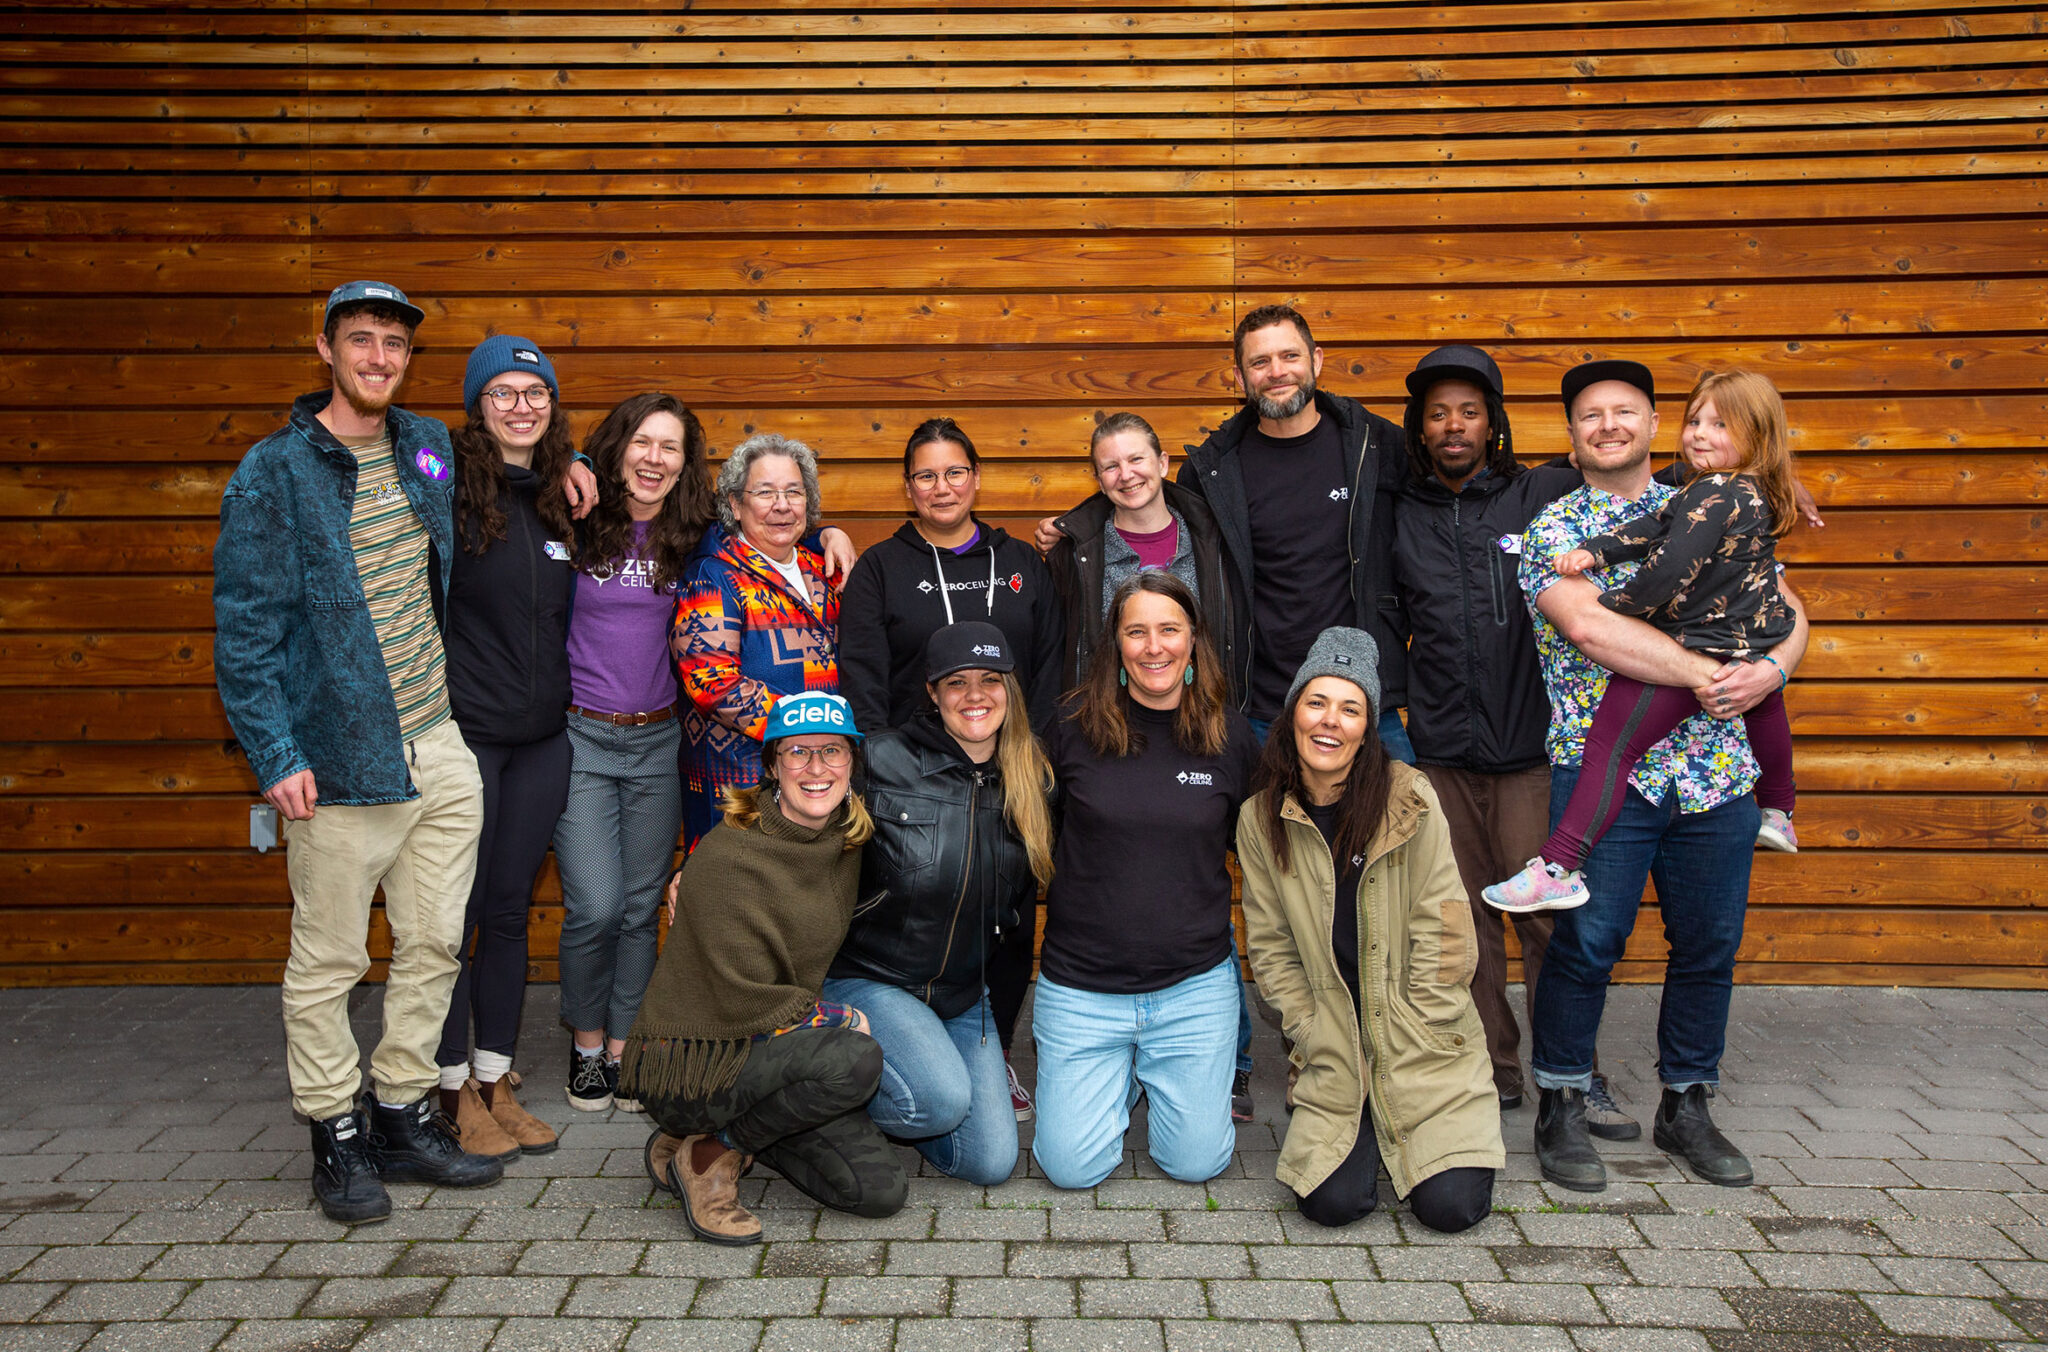 A group photo of the Zero Ceiling team taken at the Squamish Lil'wat Cultural Centre in Whistler.